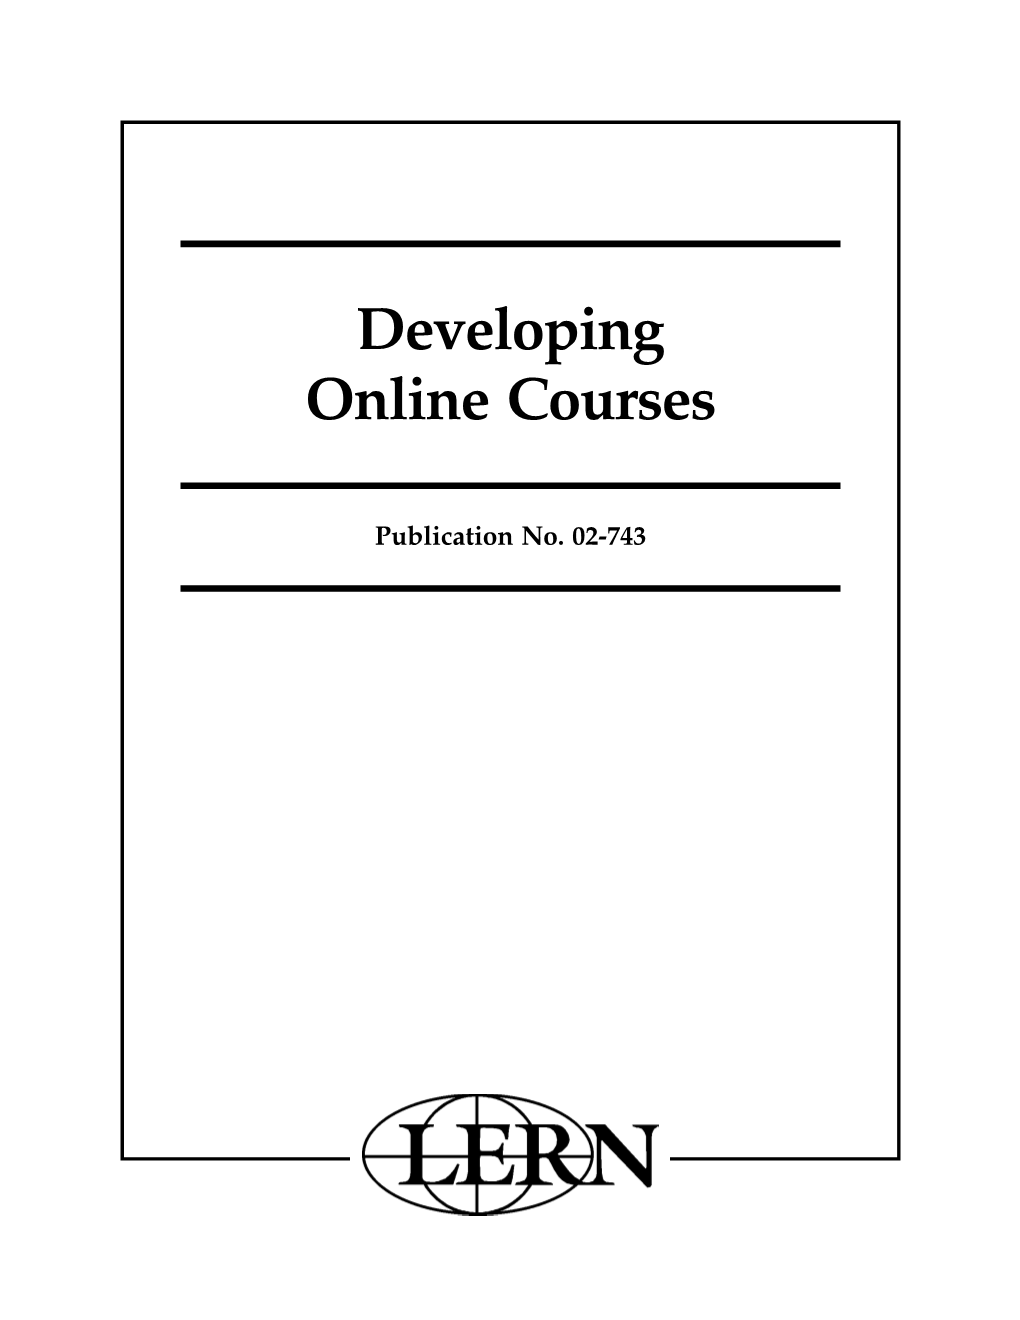 Developing Online Courses